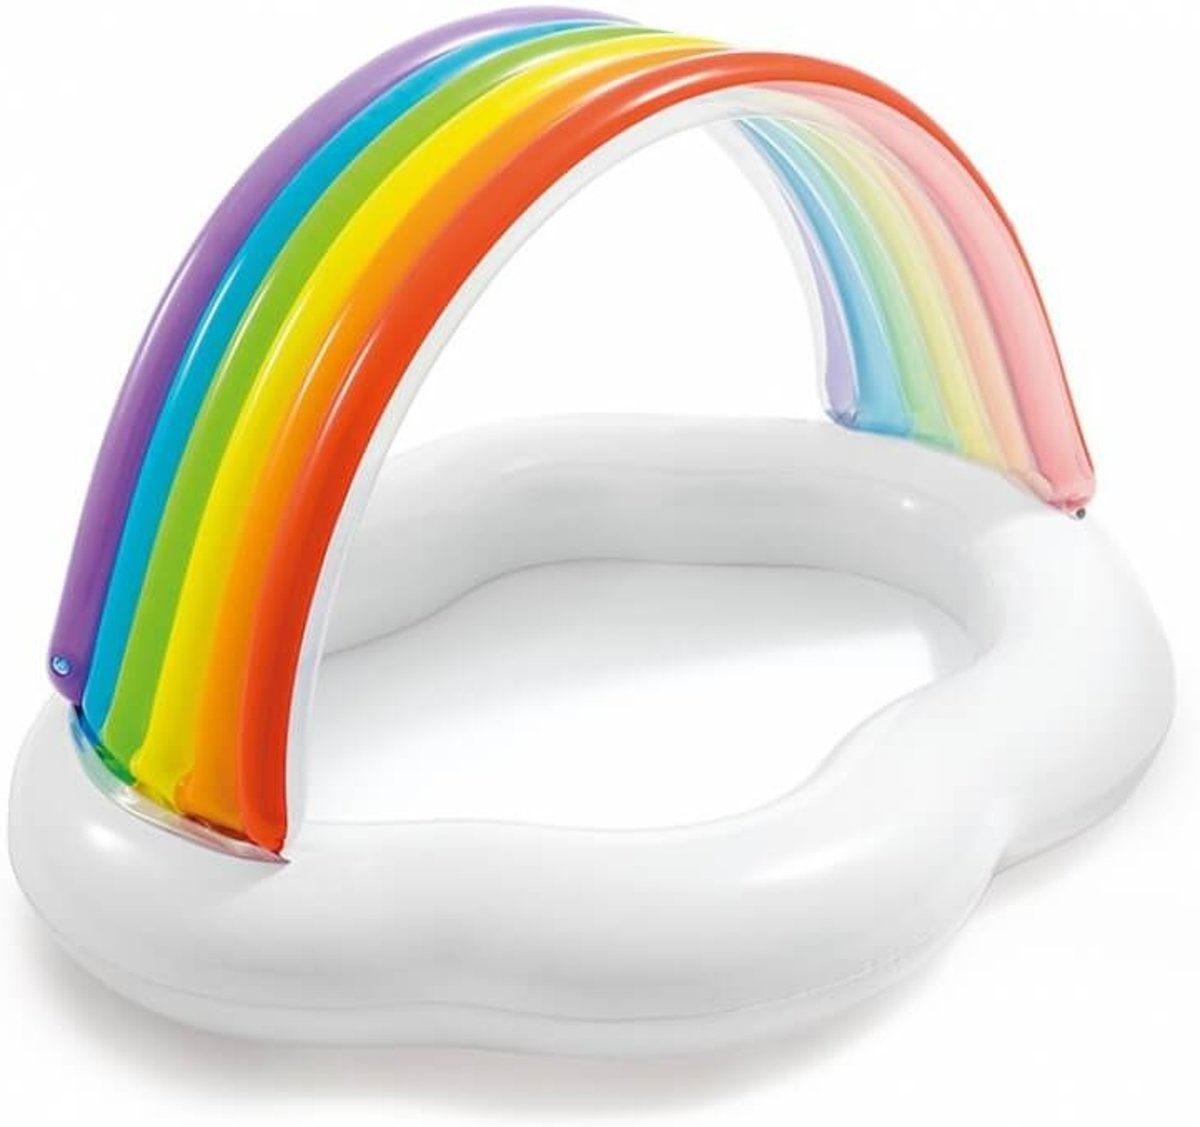 RAINBOW CLOUD BABY POOL, Ages 1-3